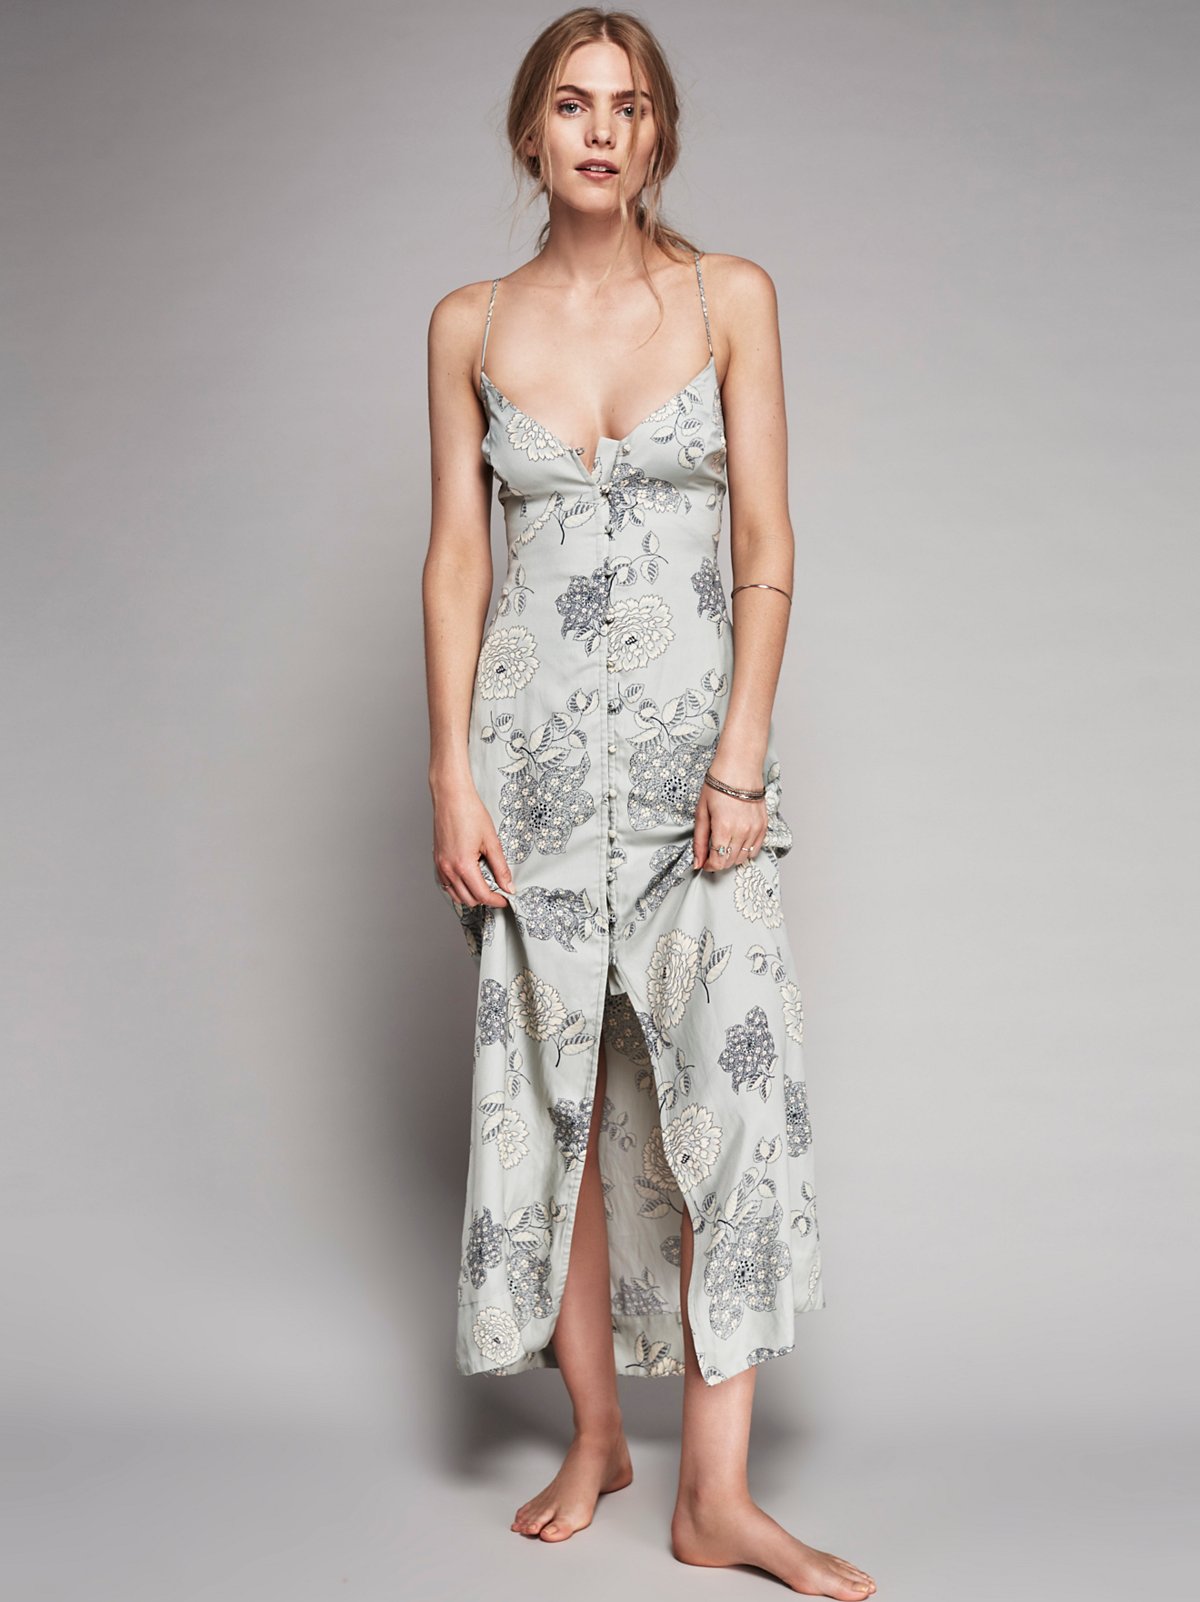 She Loves You Midi Dress at Free People Clothing Boutique